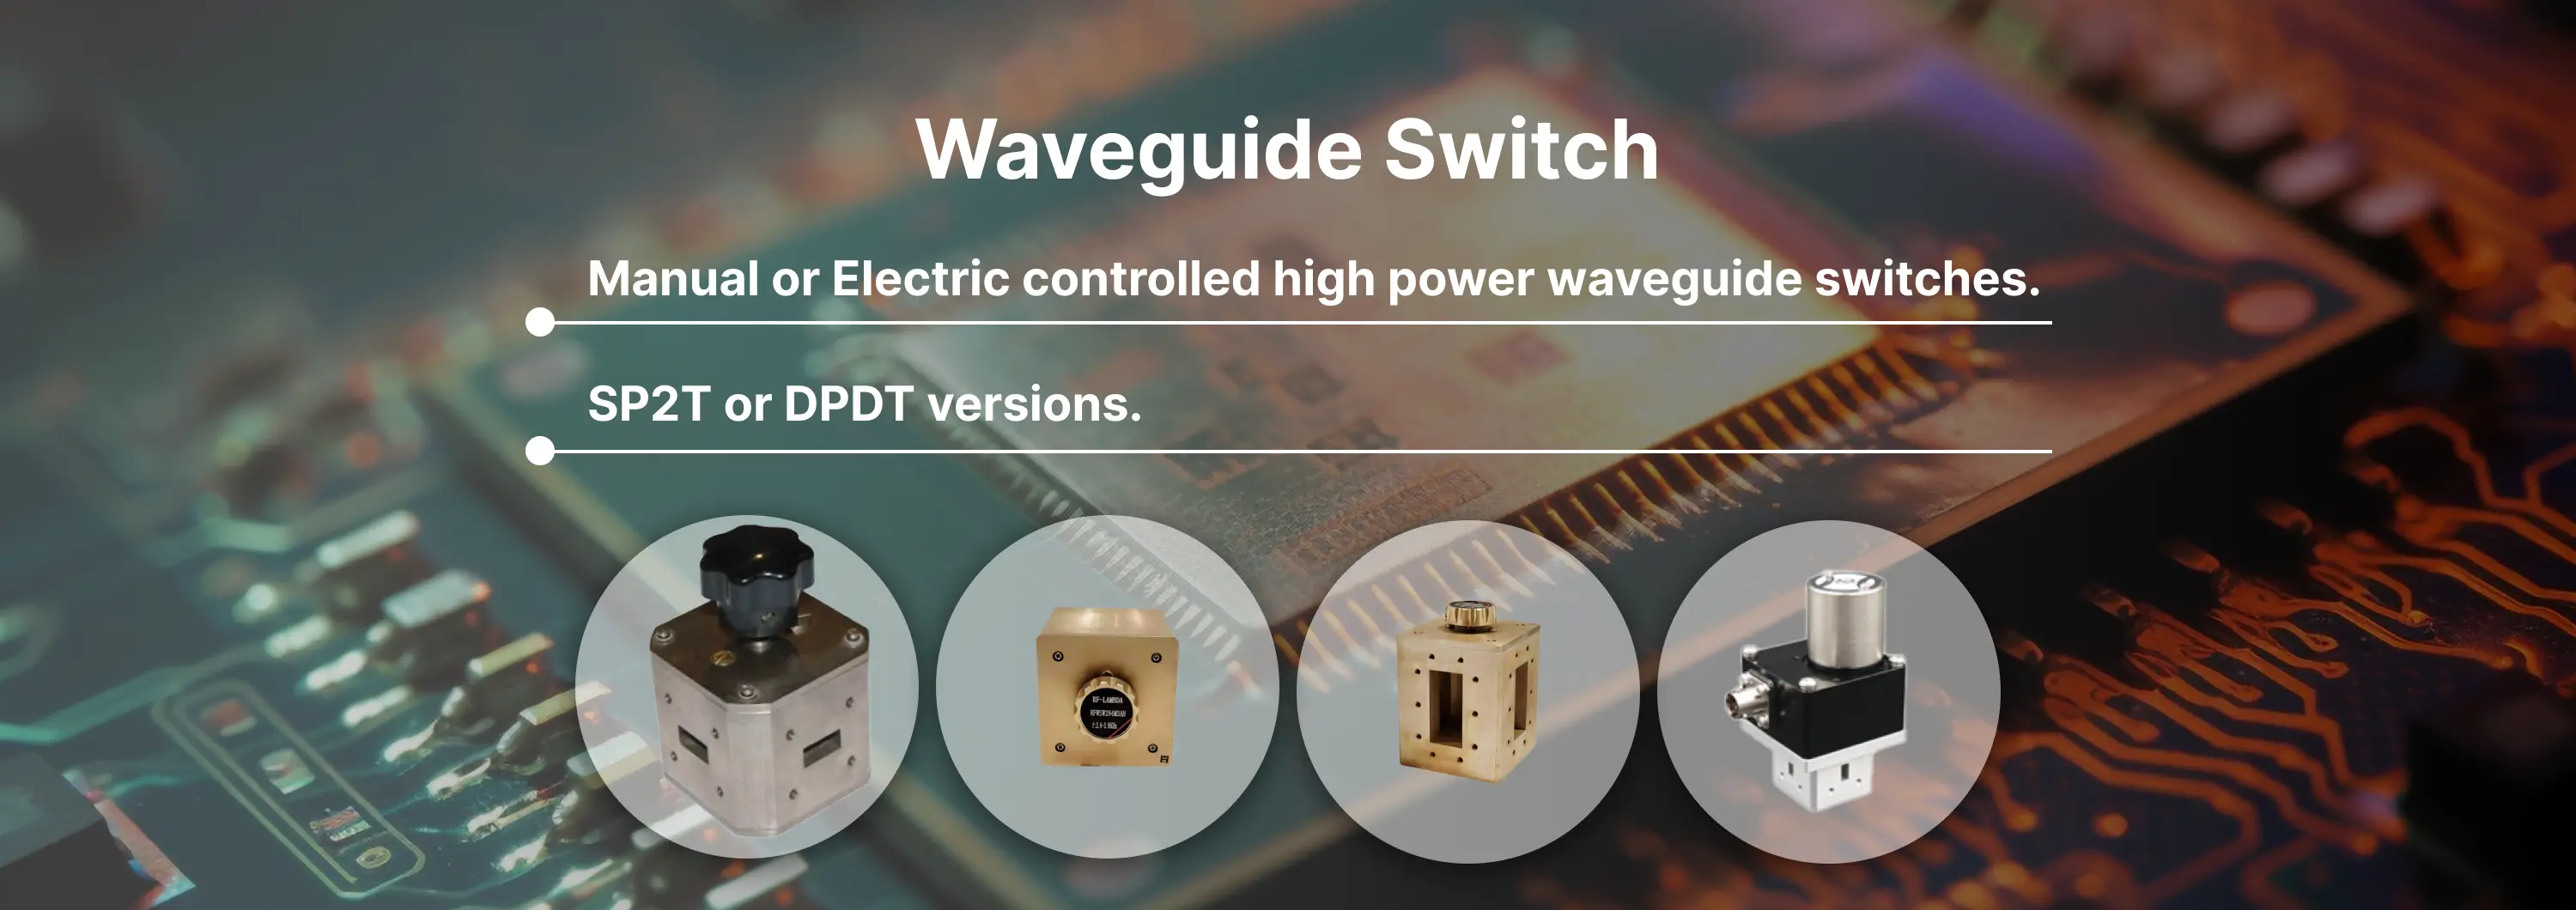 Waveguide Switch Banner